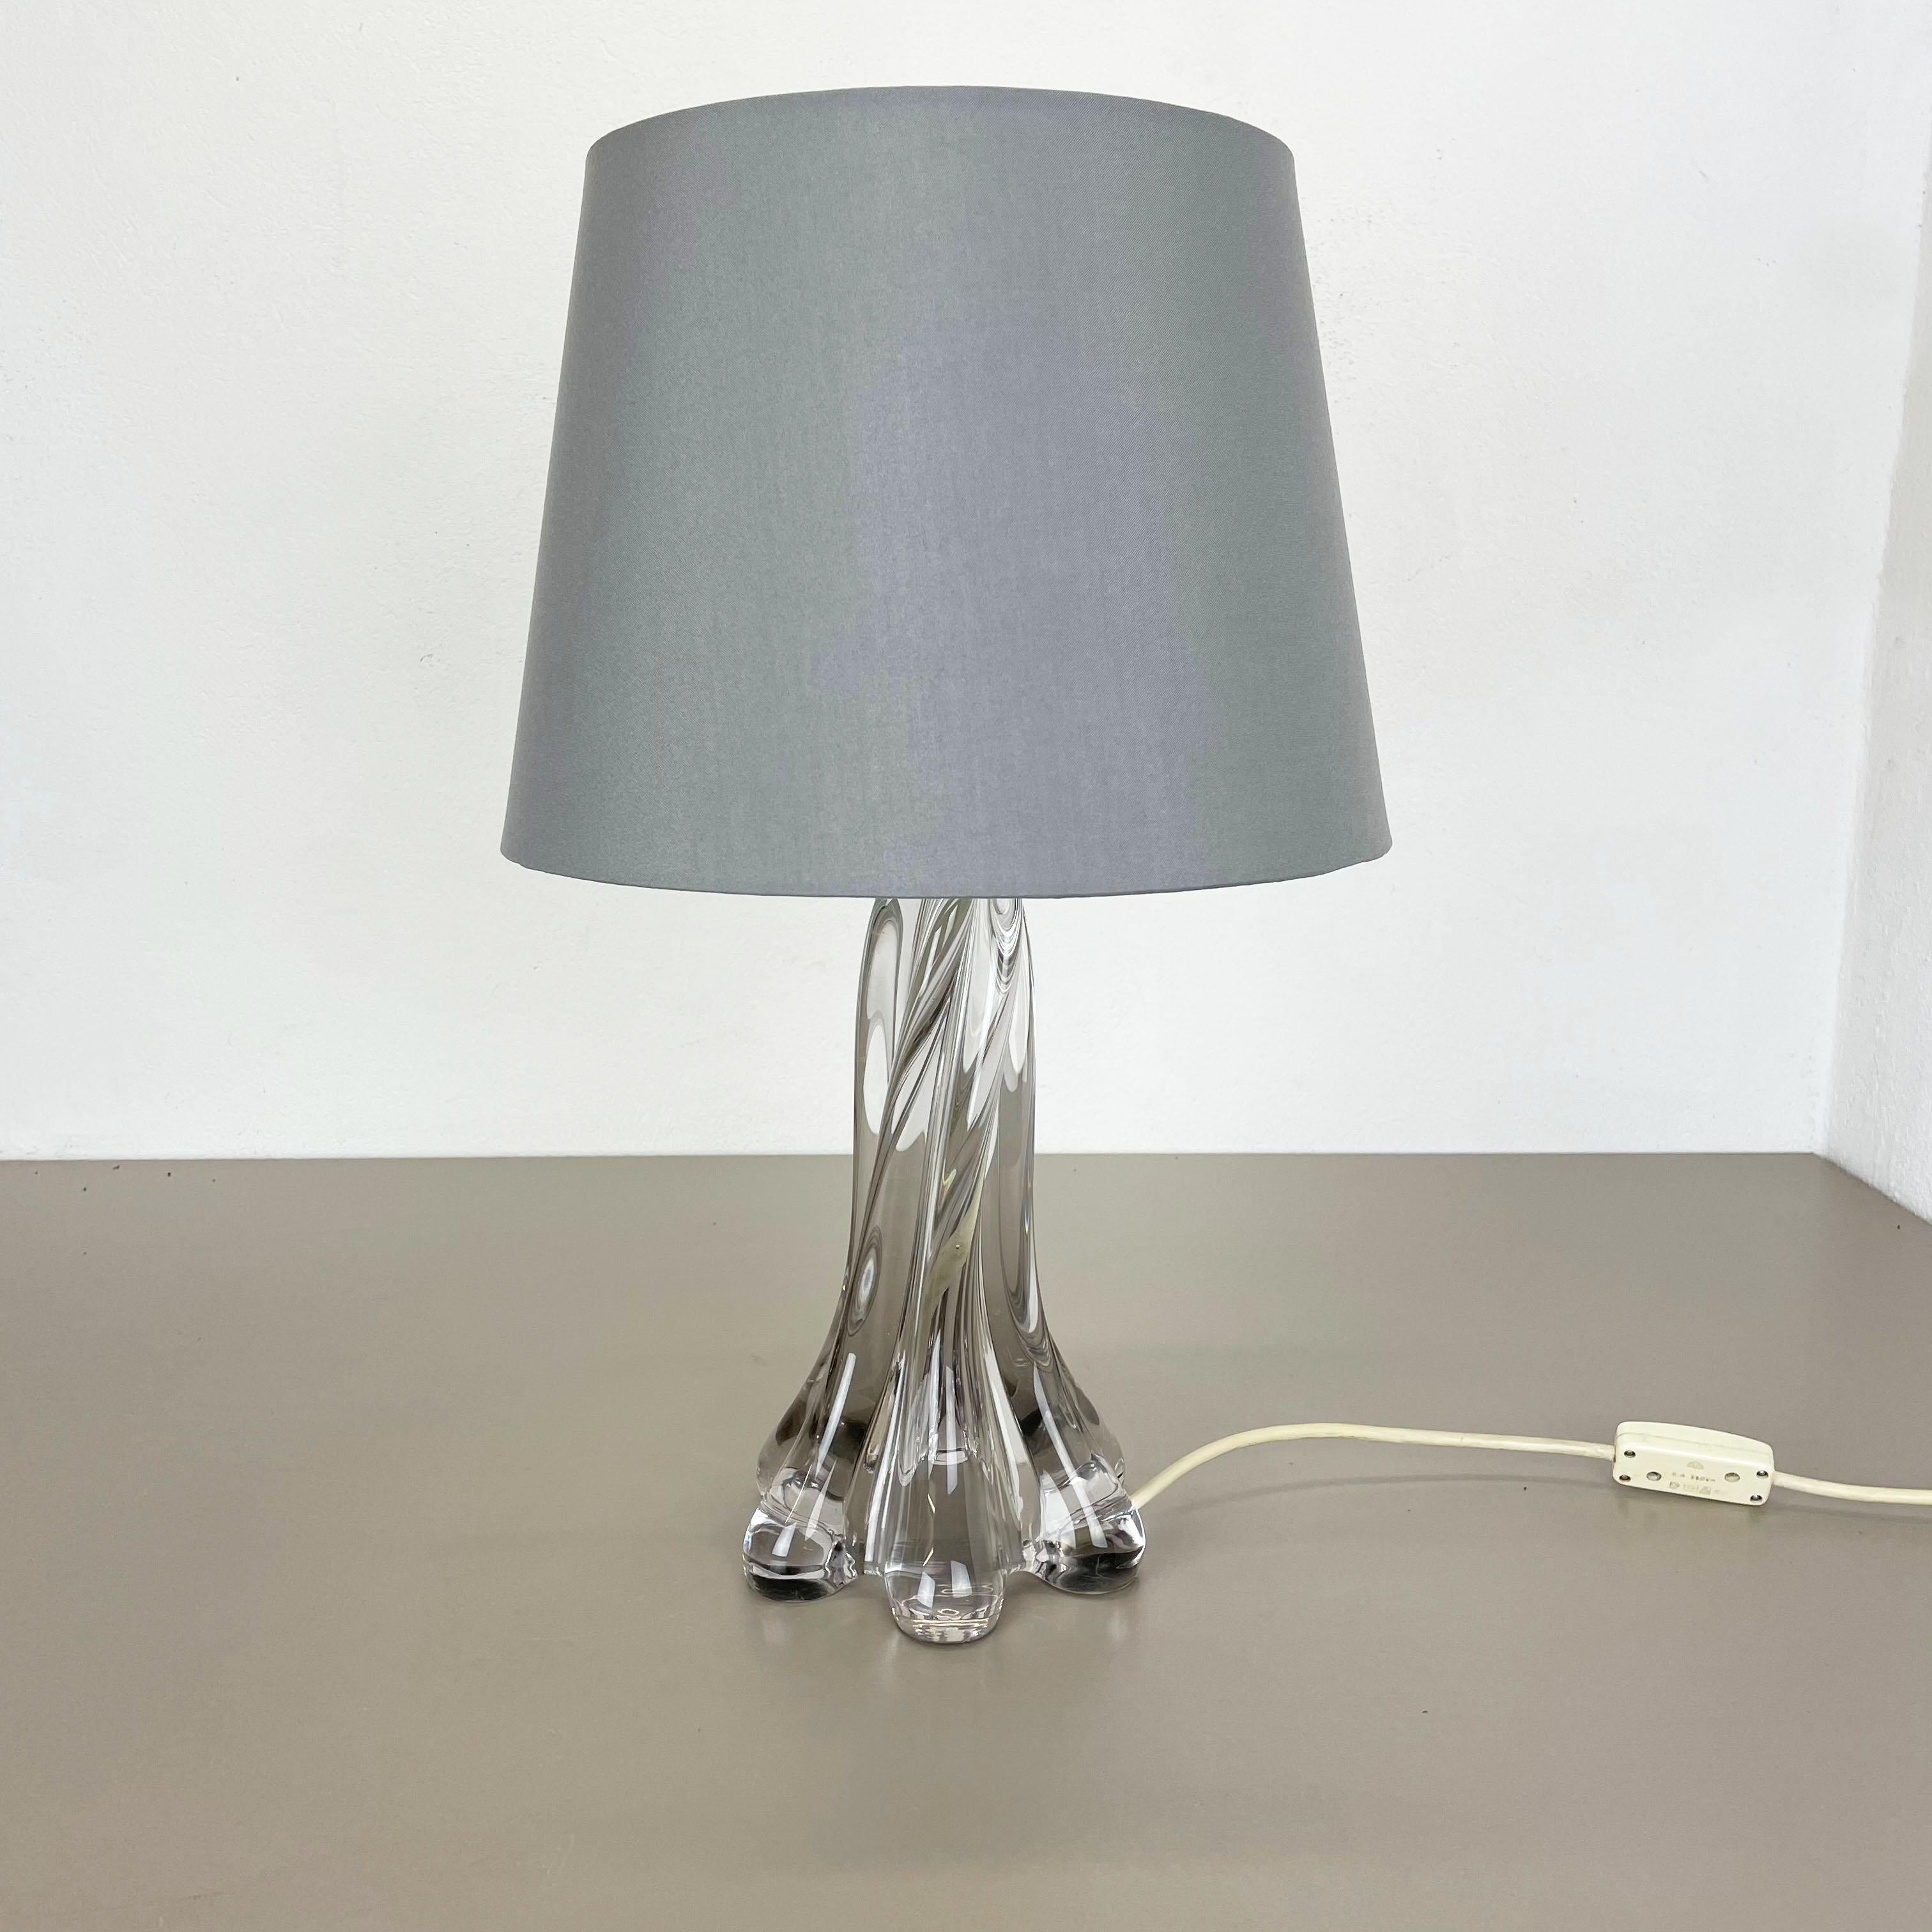 Article:

Table light desk top light


Origin:

Murano, Italy


Age:

1970s




Description:


This fantastic vintage table light base was designed and produced in the 1970s in Murano, Italy. The light base is made of high quality Italian Murano